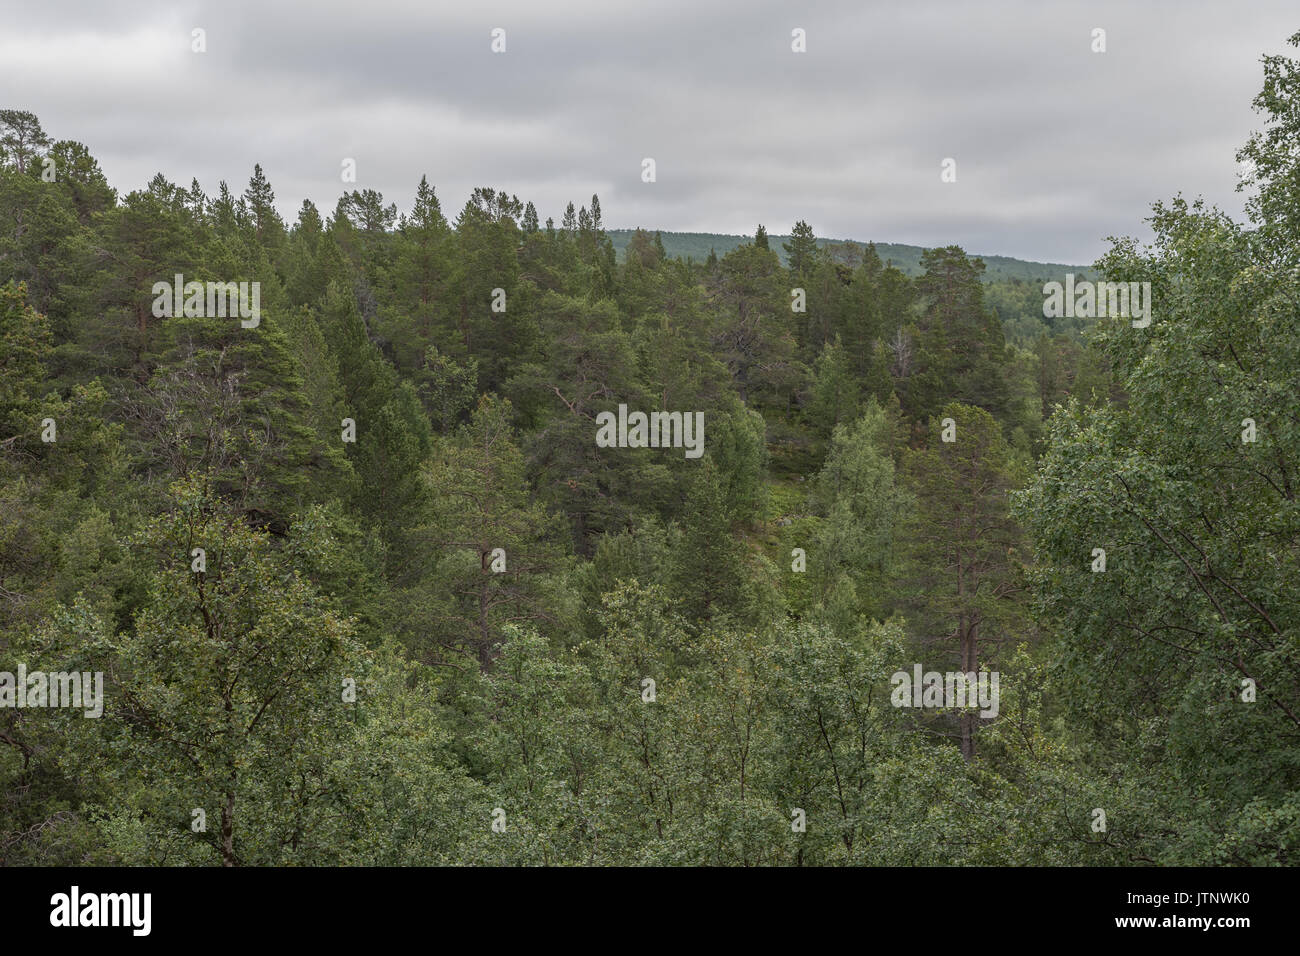 lots of trees standing together in forest Stock Photo